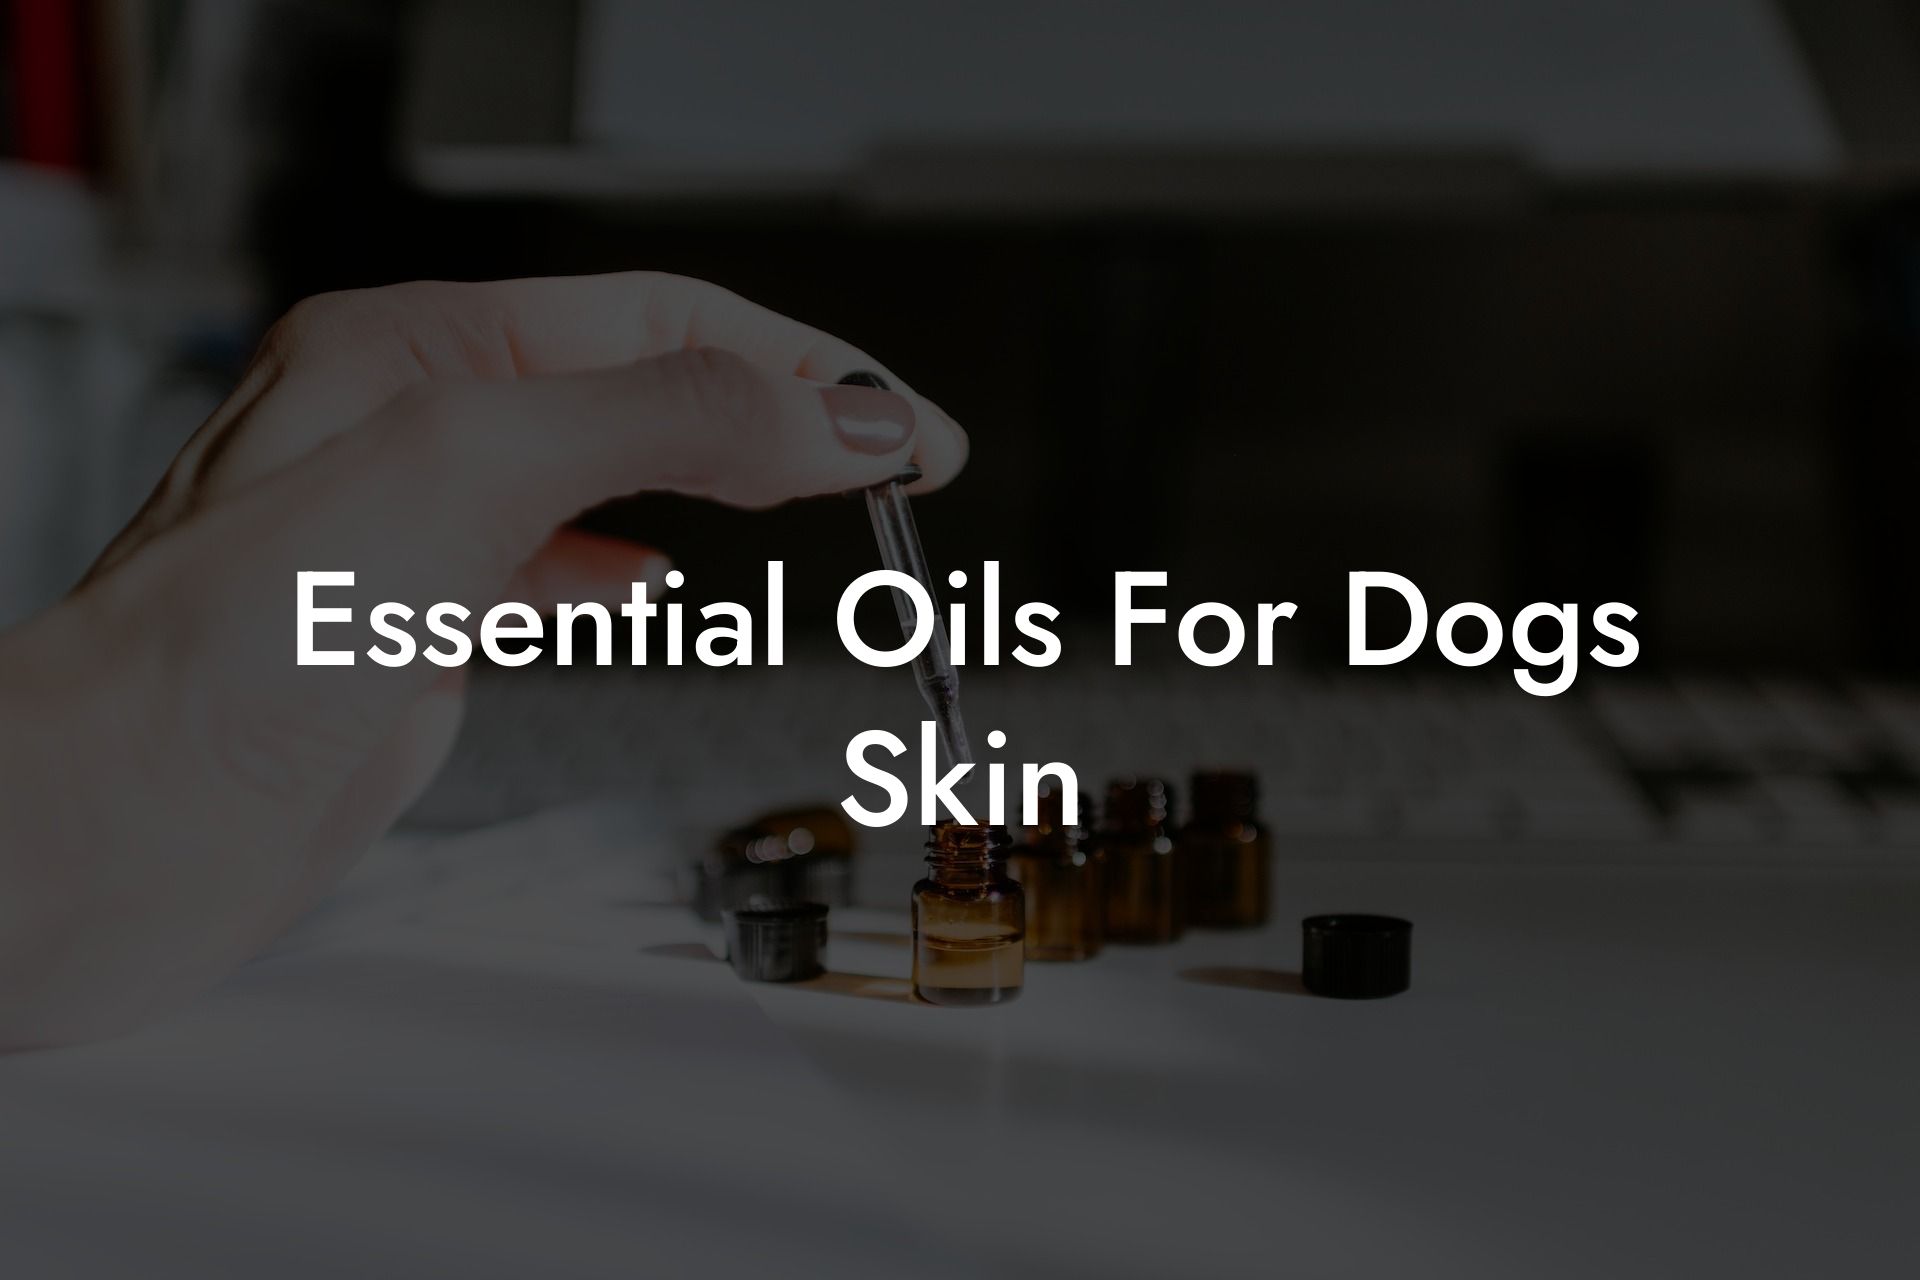 Essential Oils For Dogs Skin